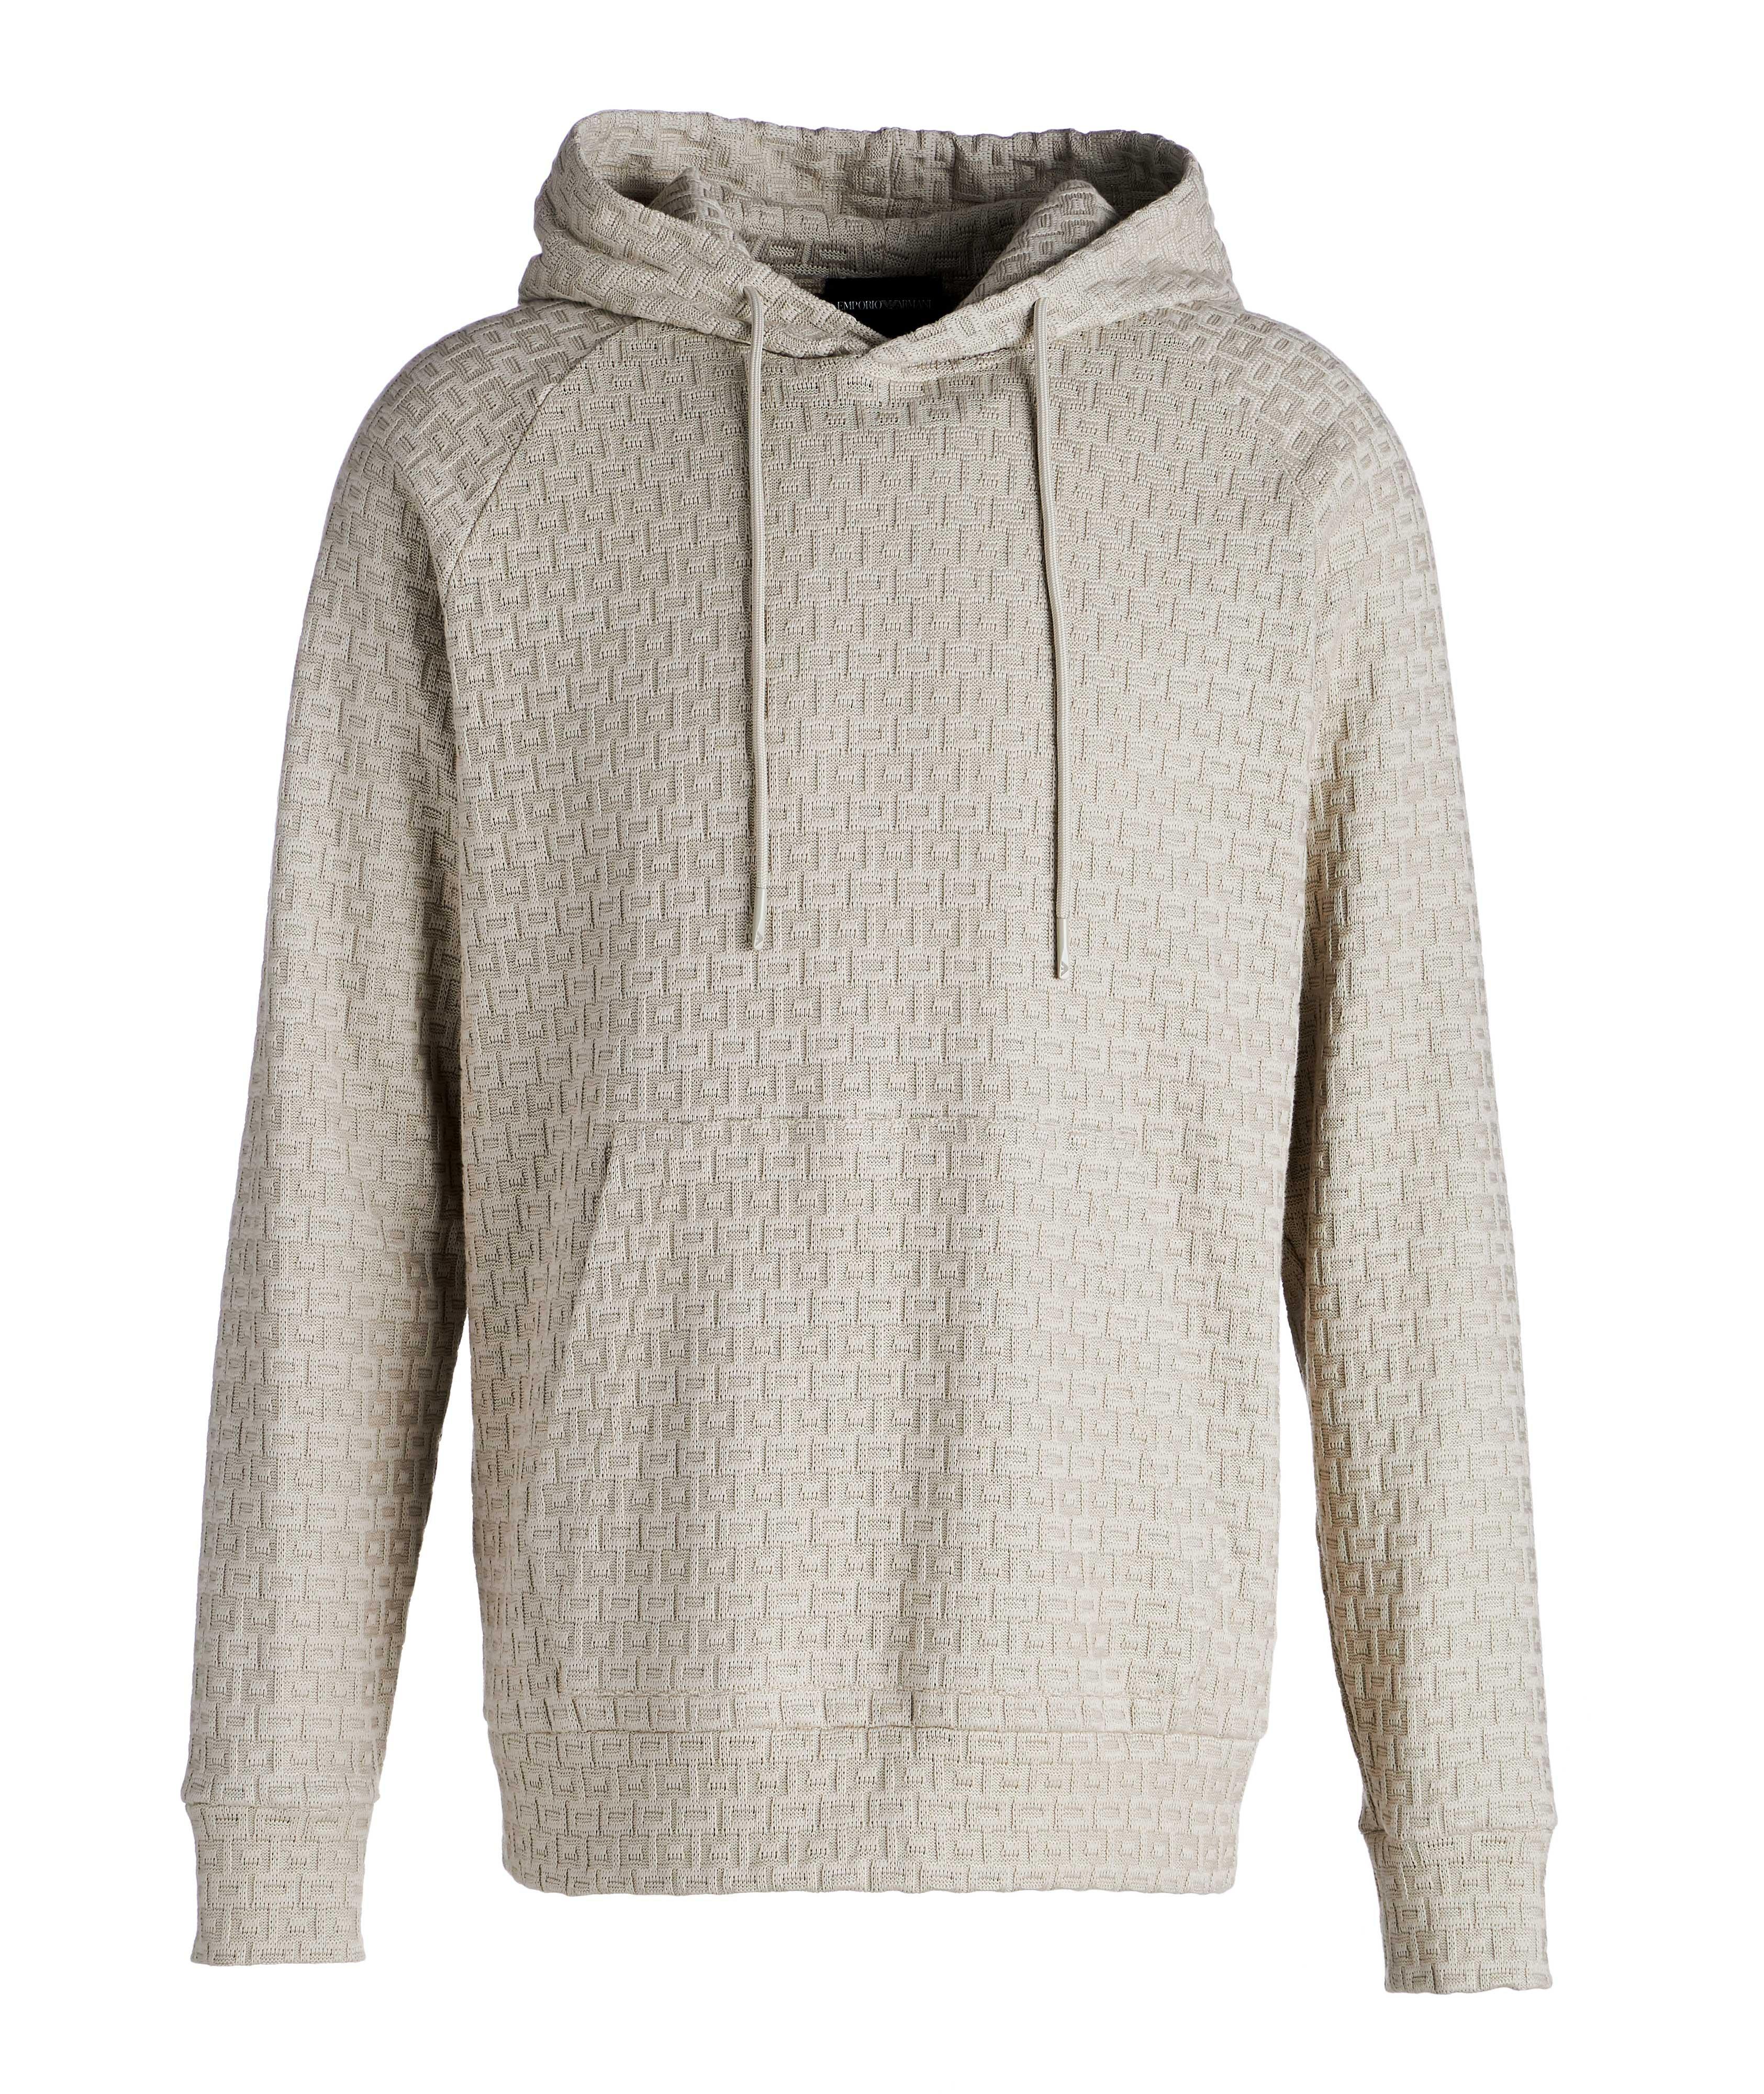 Textured Knit Cotton Hoodie image 0